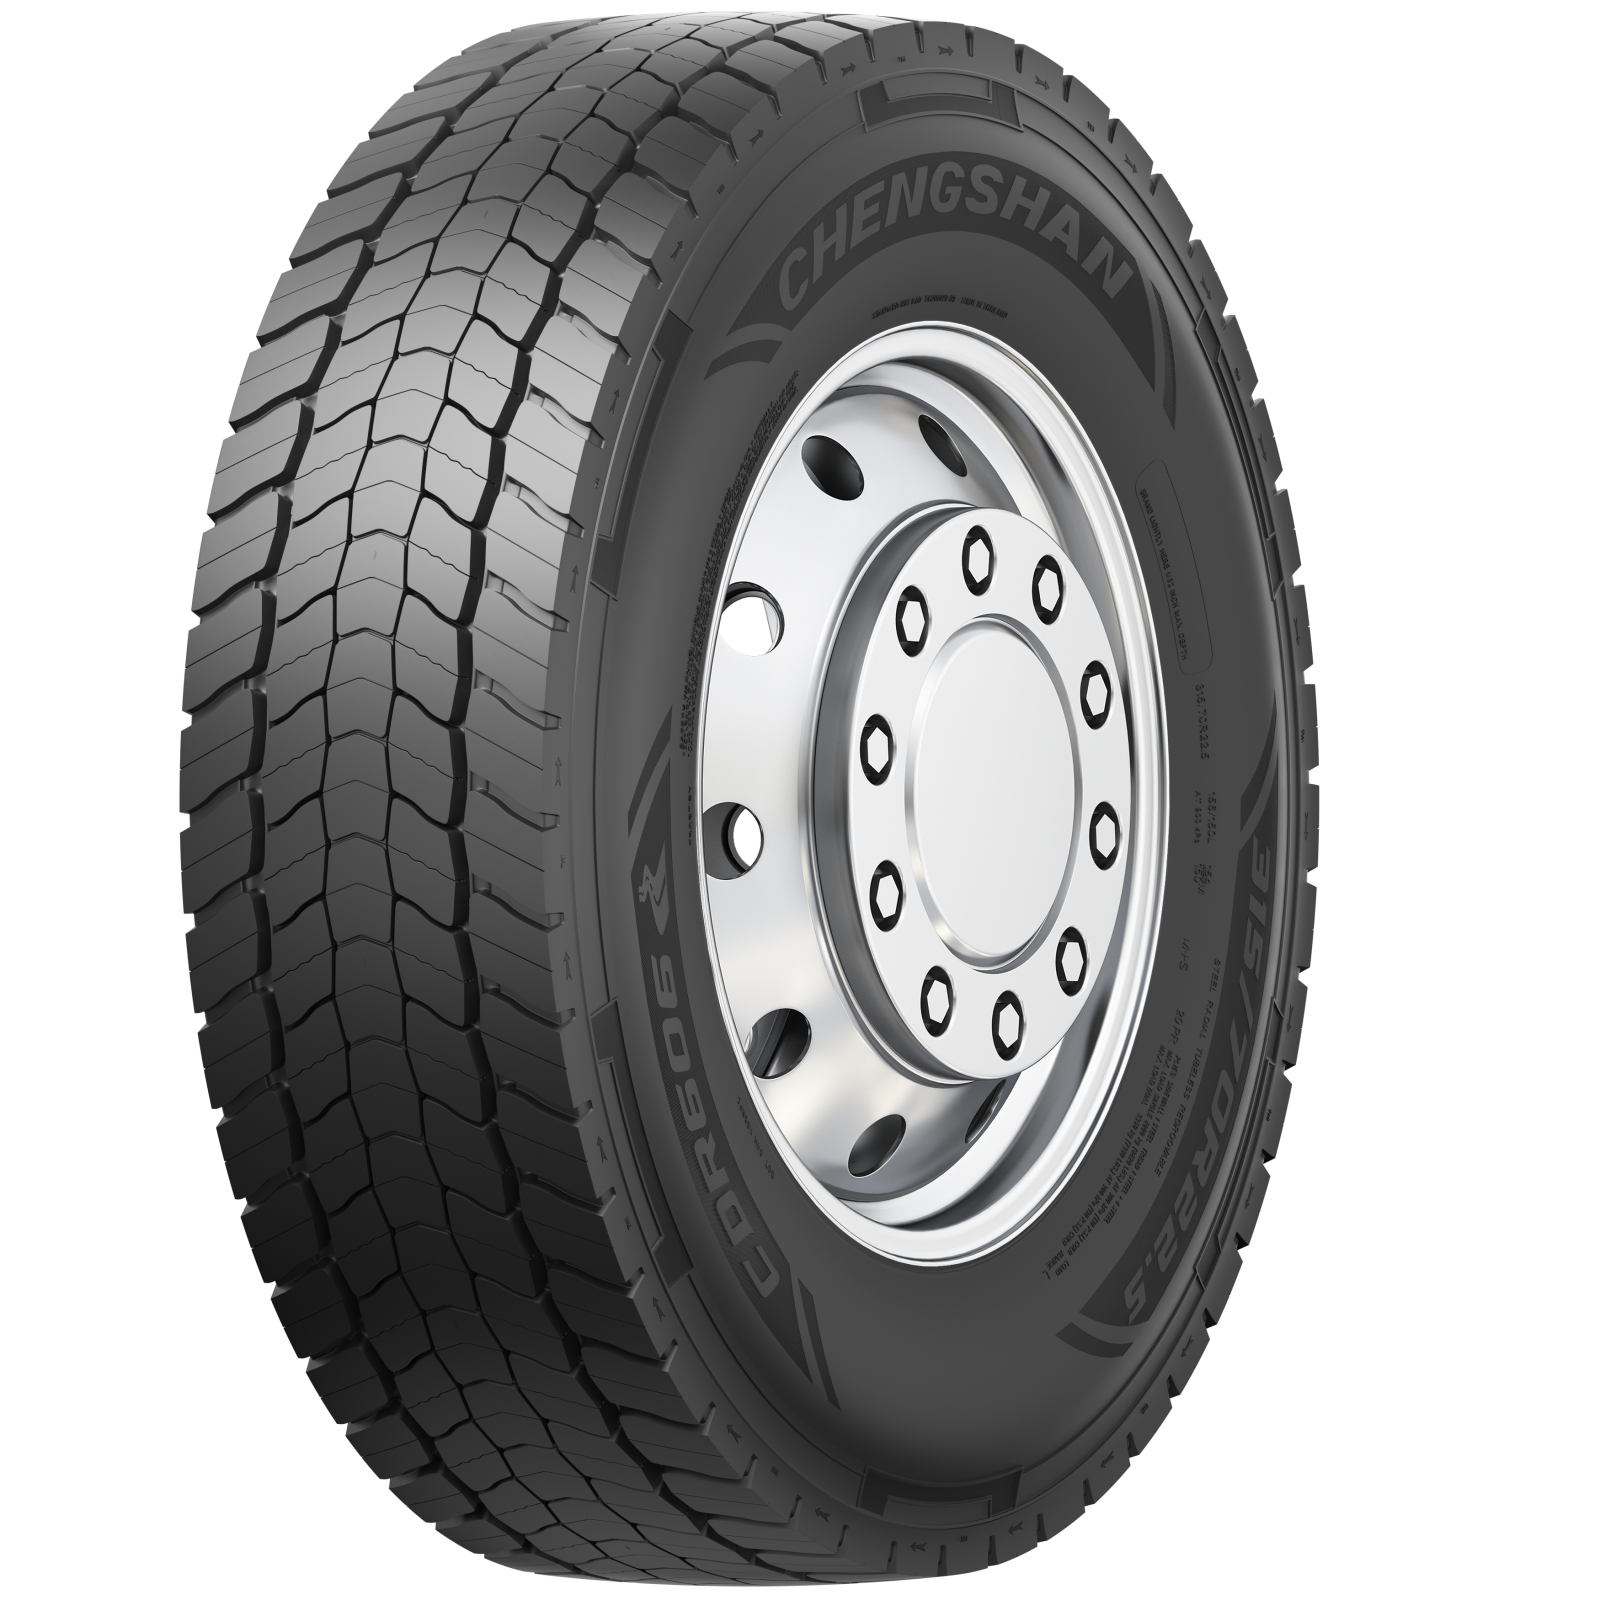 Gomme Nuove Chengshan 295/80 R22.5 154M CDR606 (8.00mm) pneumatici nuovi Estivo